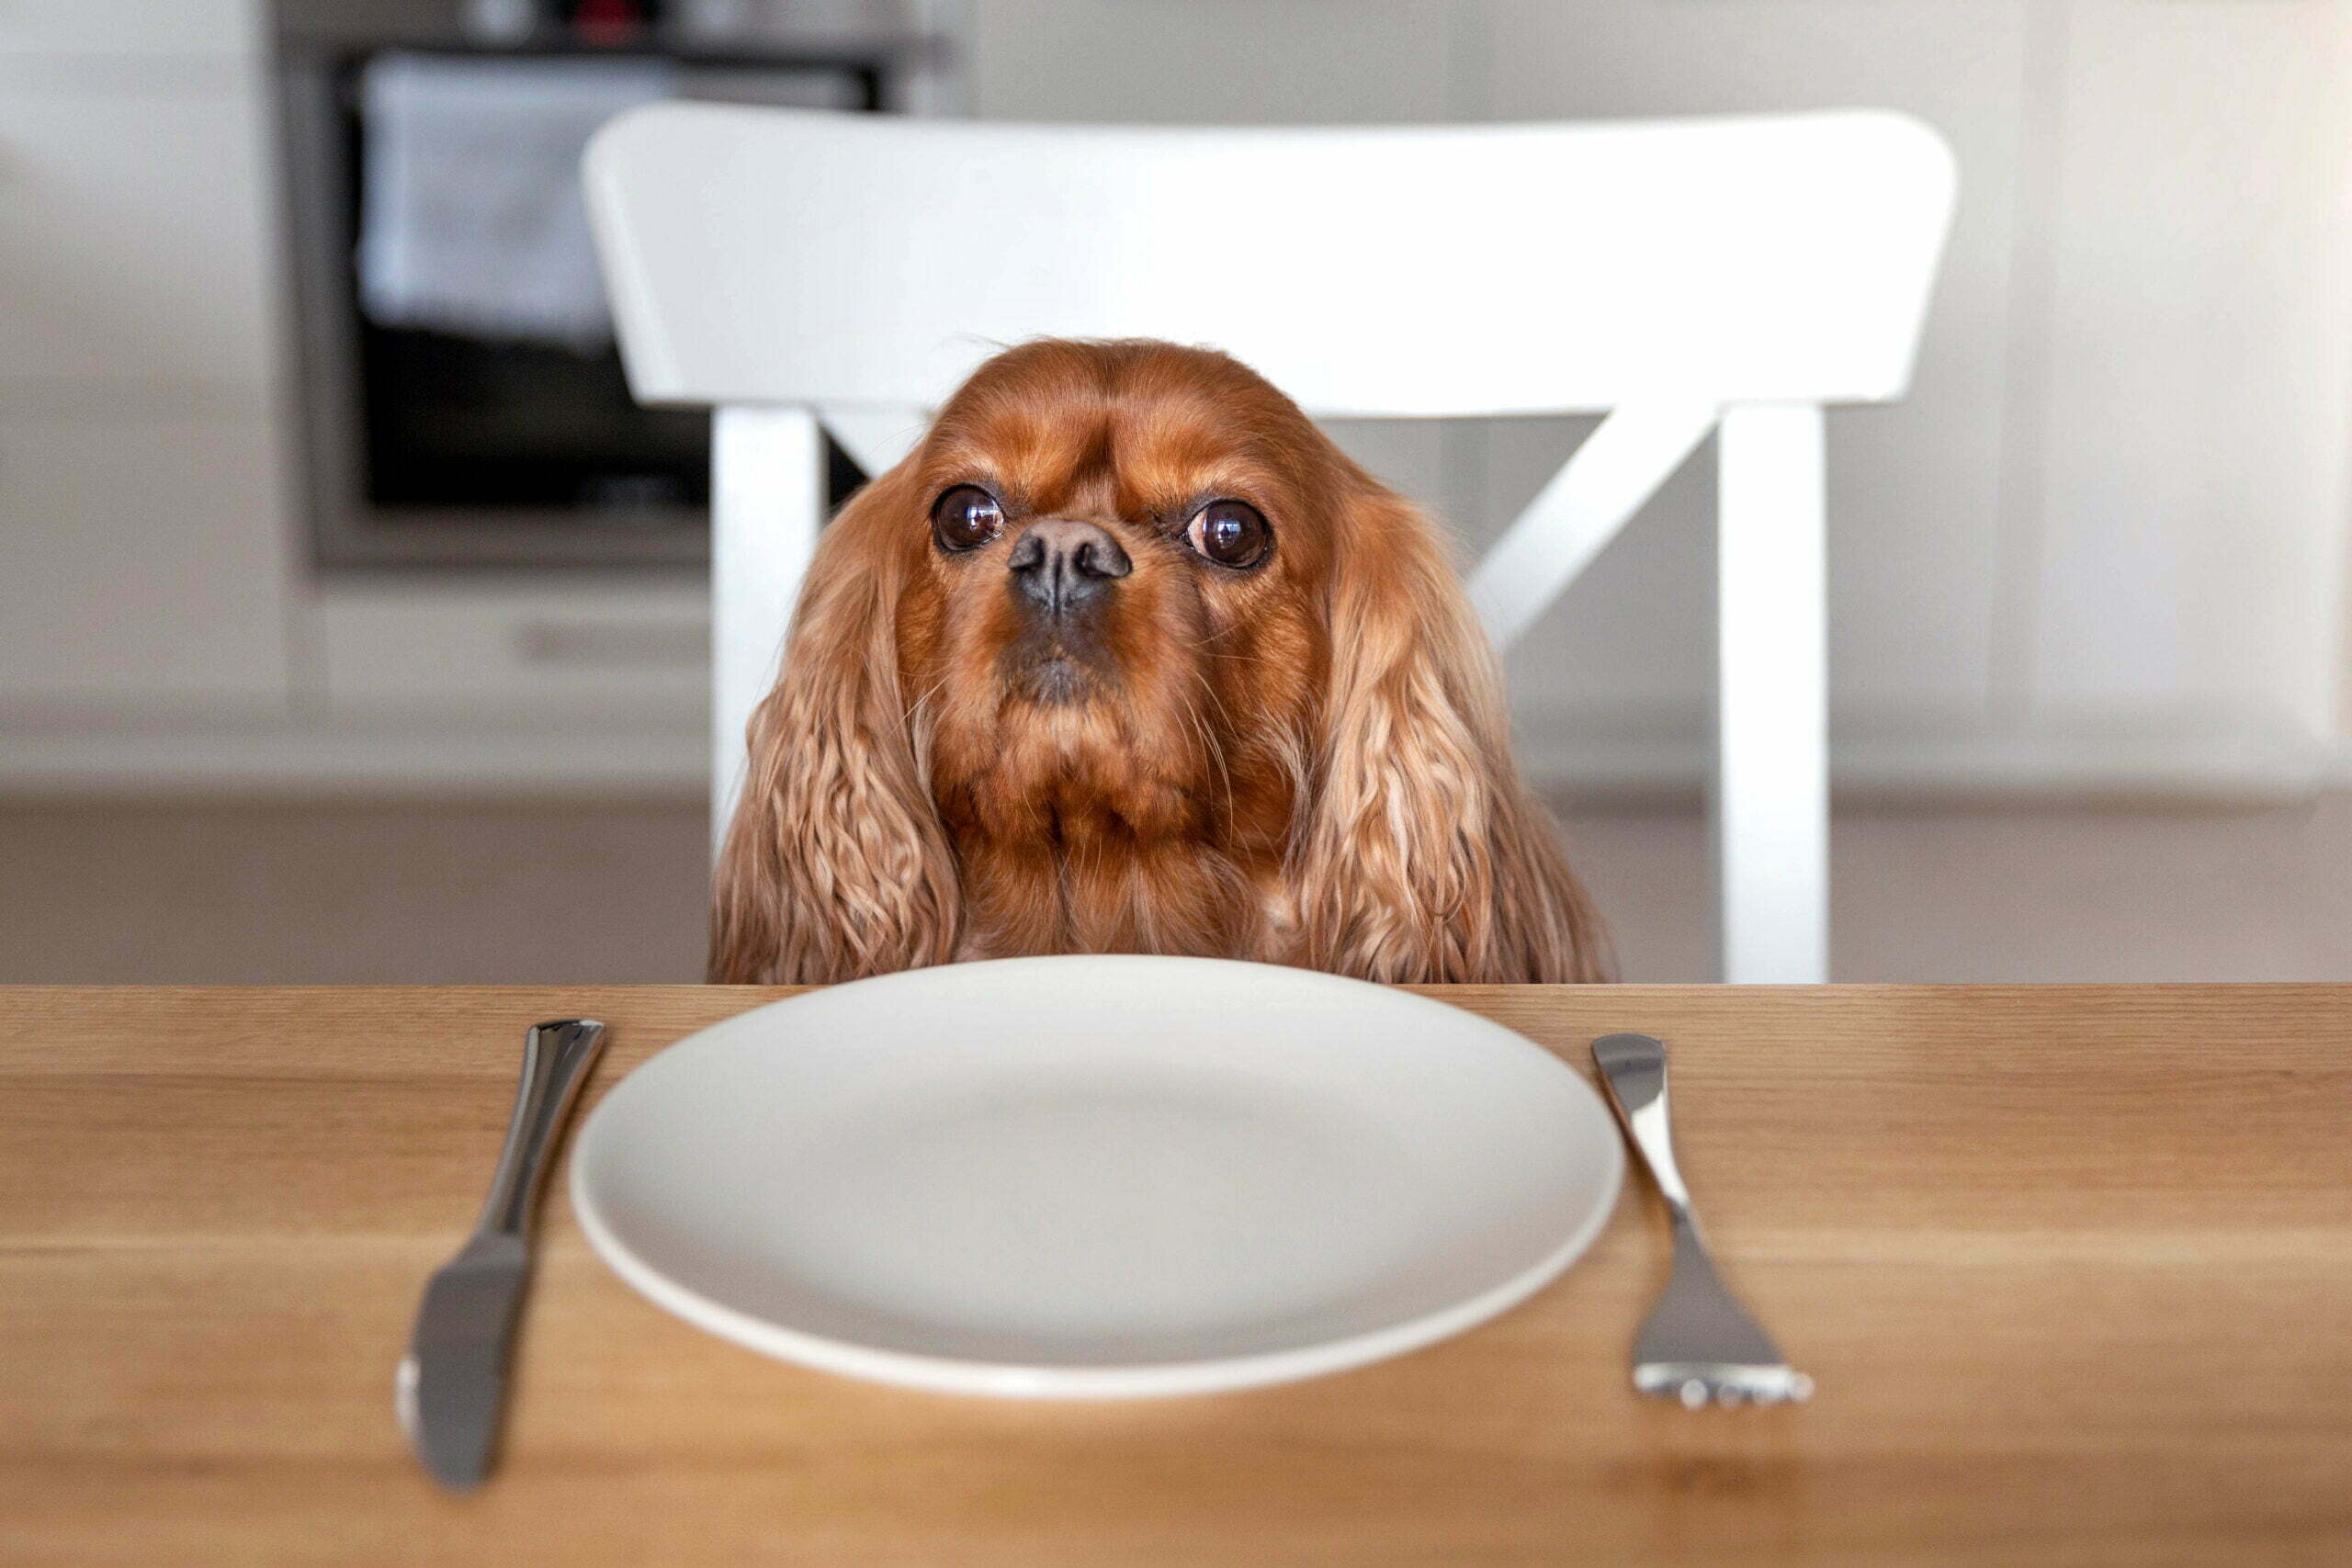 What are some of the common problems associated with feeding dogs the wrong food?